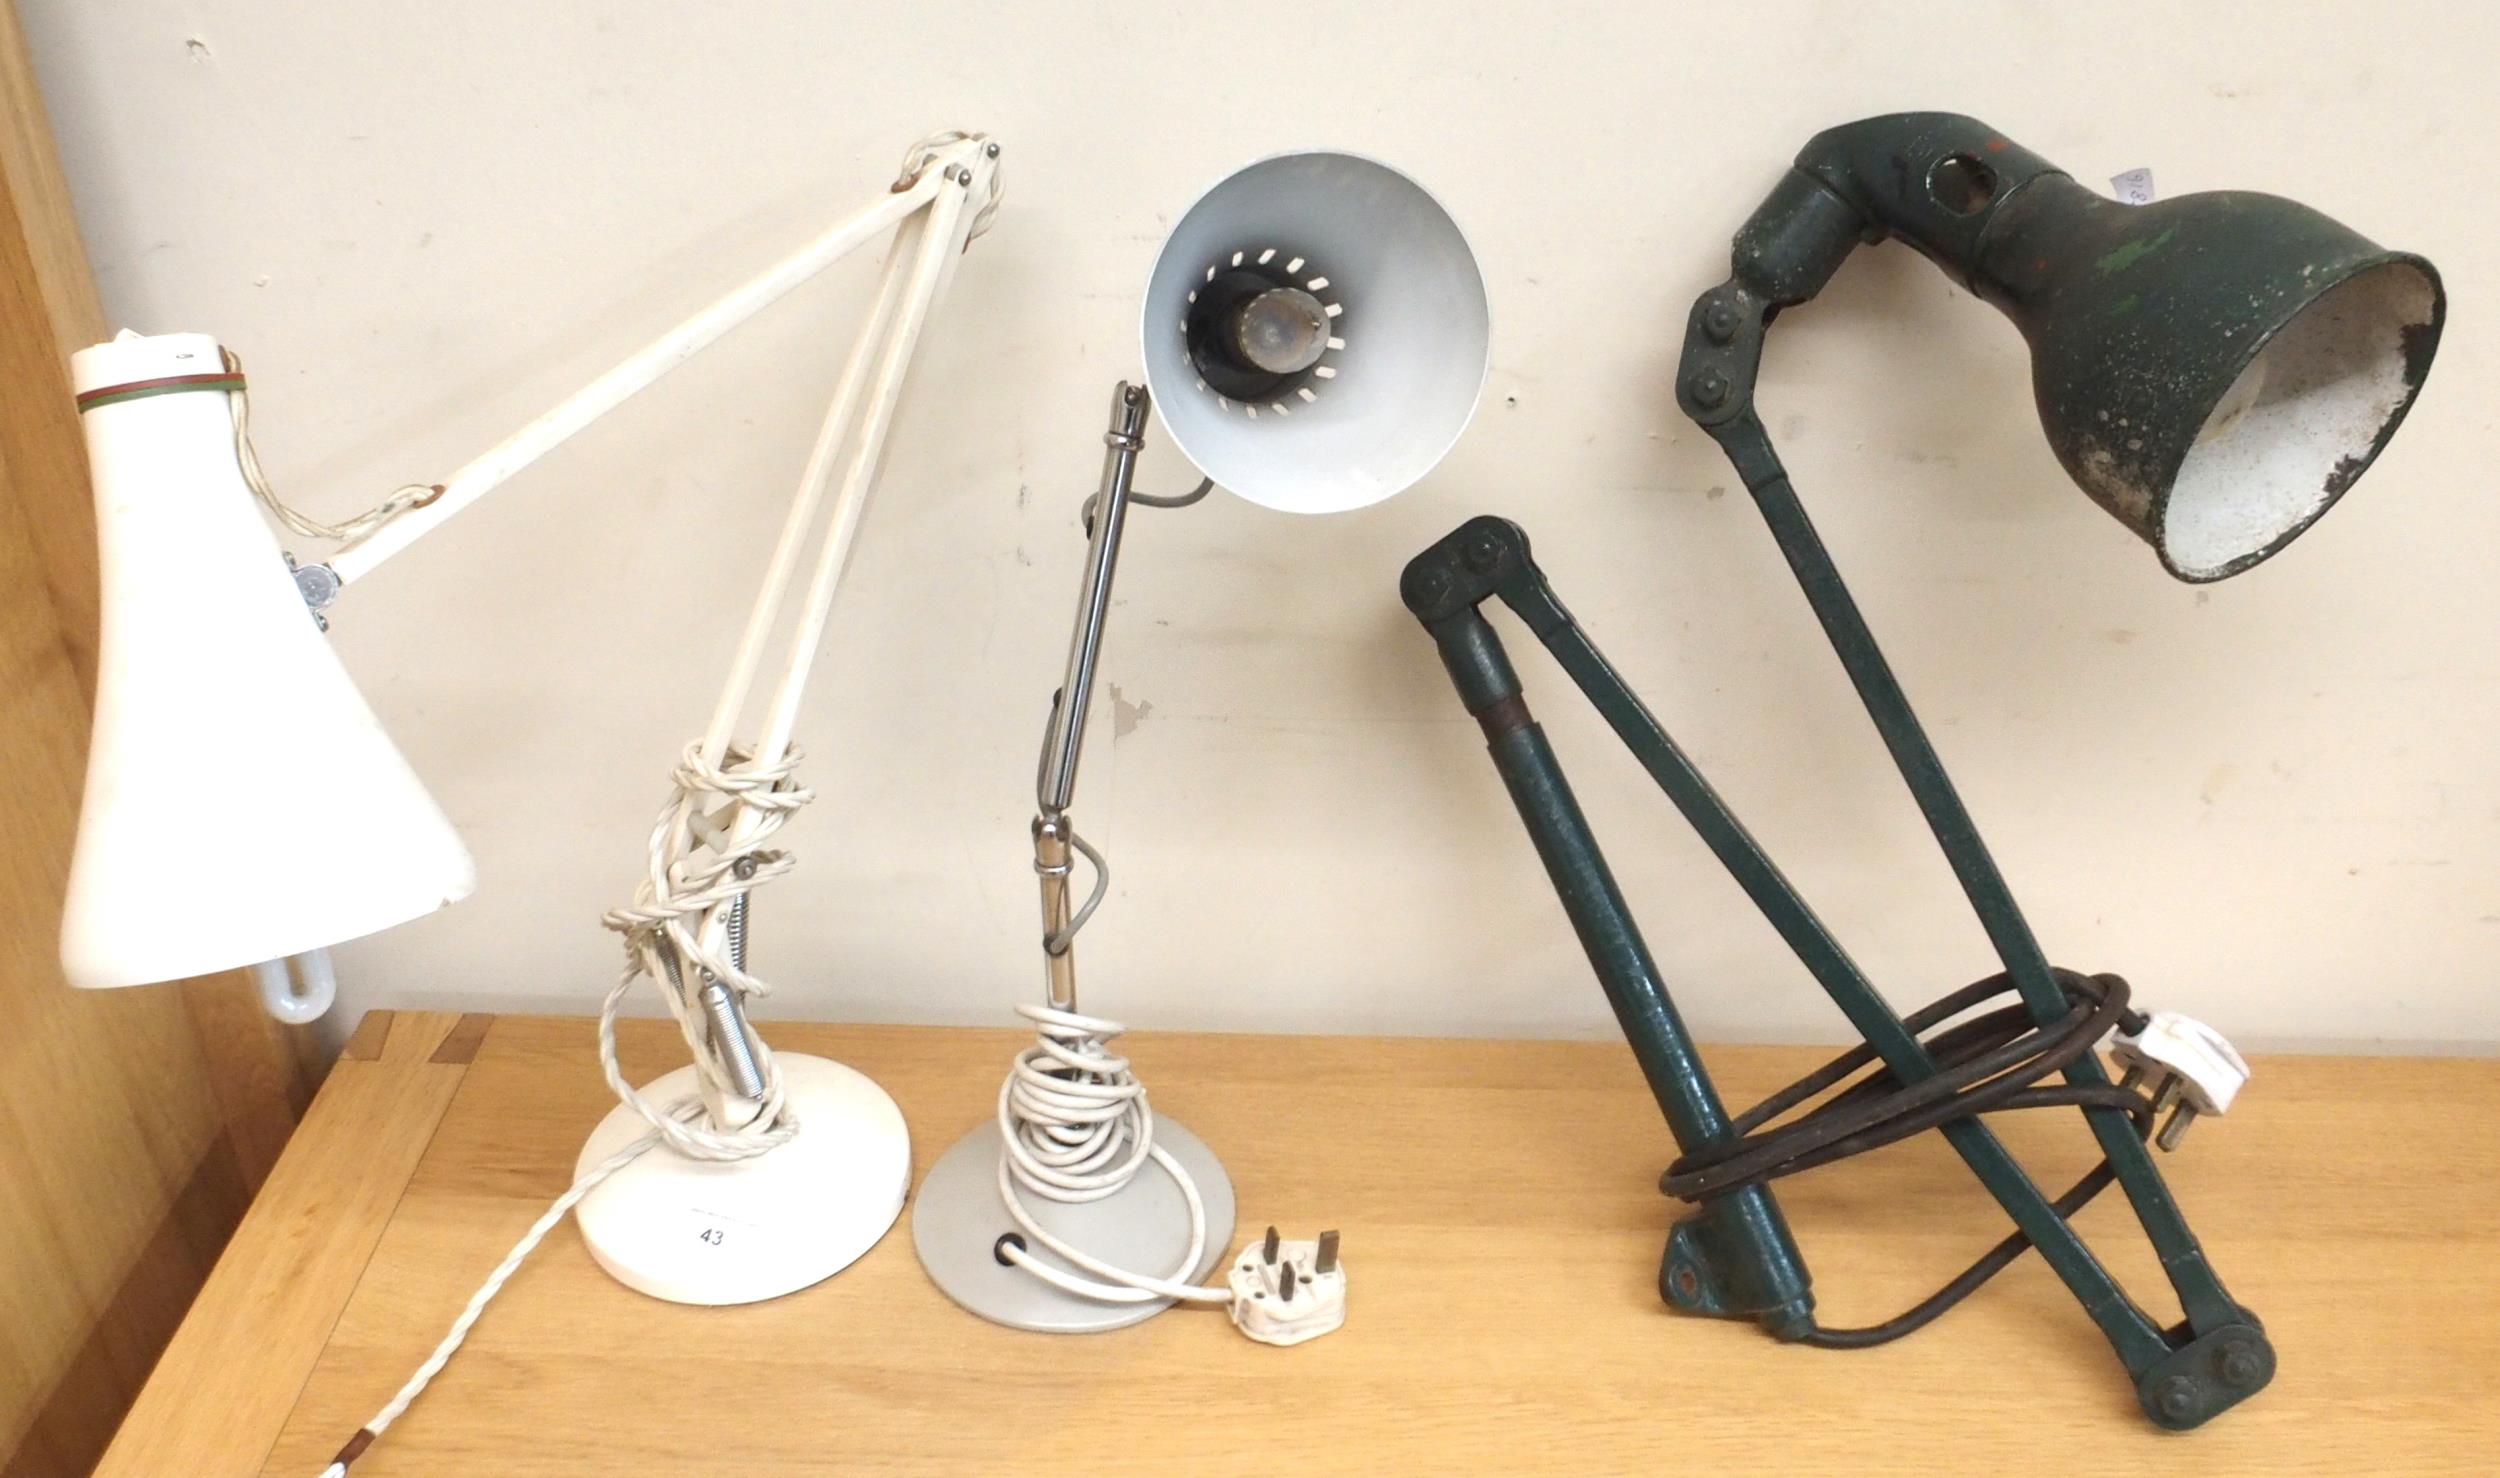 A mid 20th century "Anglepoise" desk lamp, a smaller adjustable desk lamp and a wall mounted